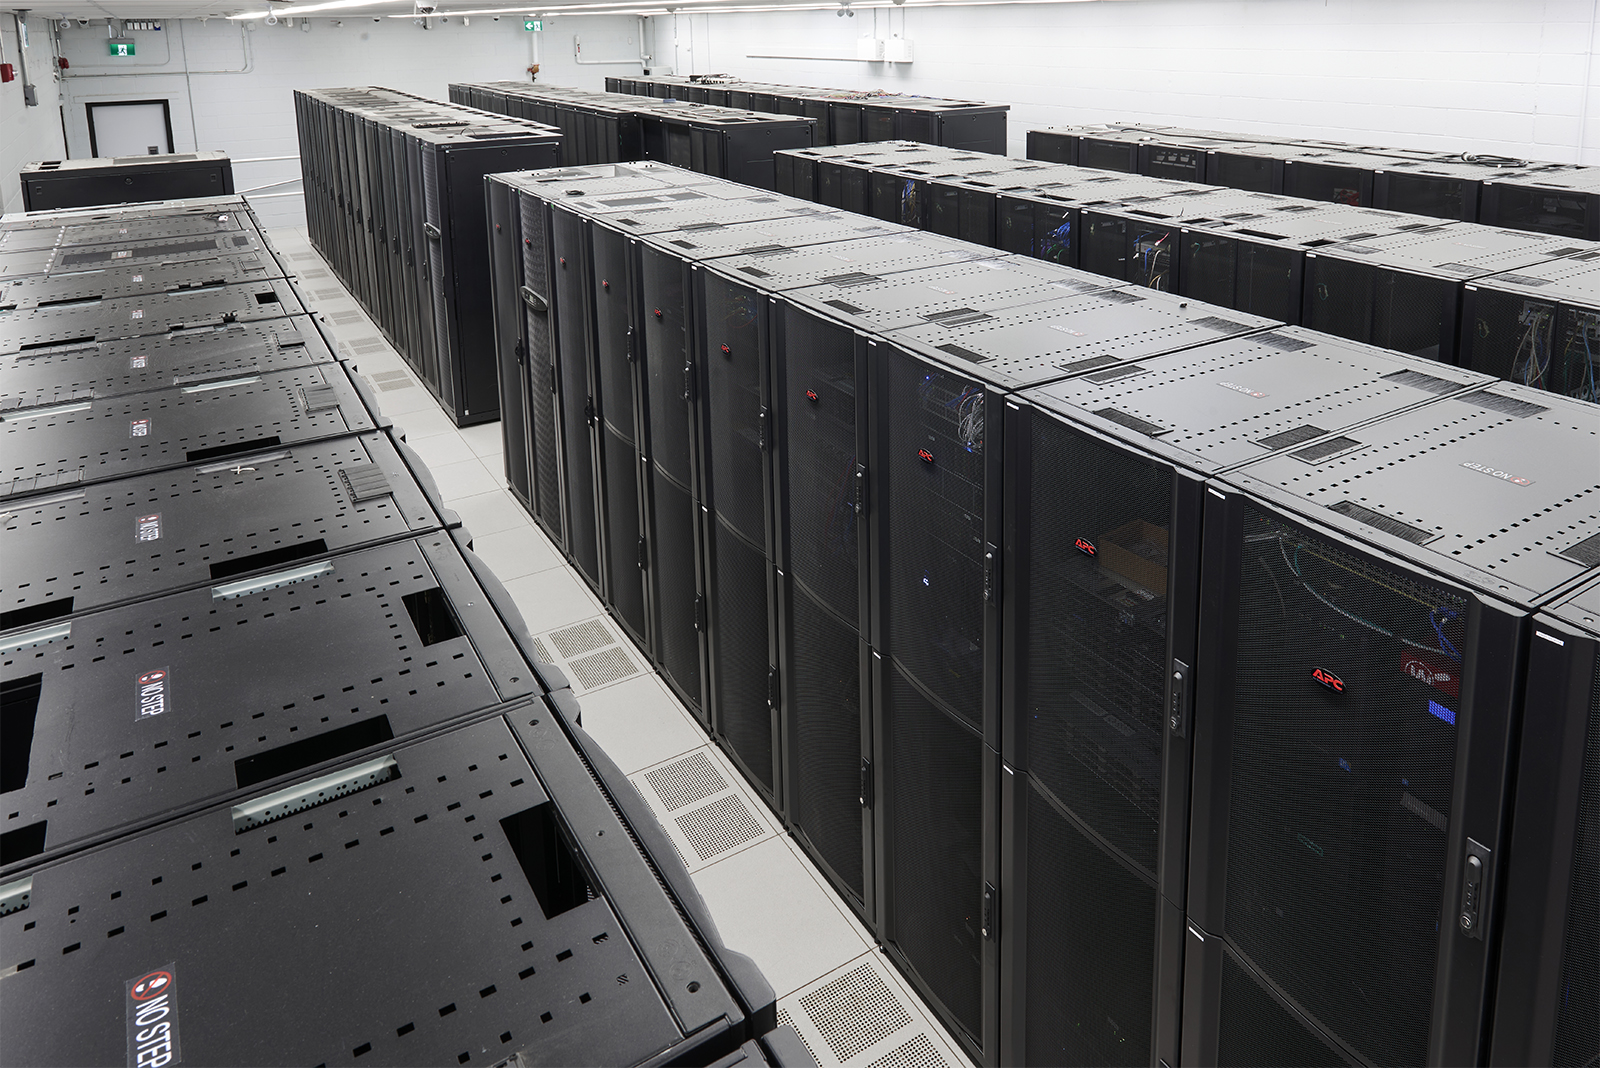 One of the largest data center colocation provider in Toronto